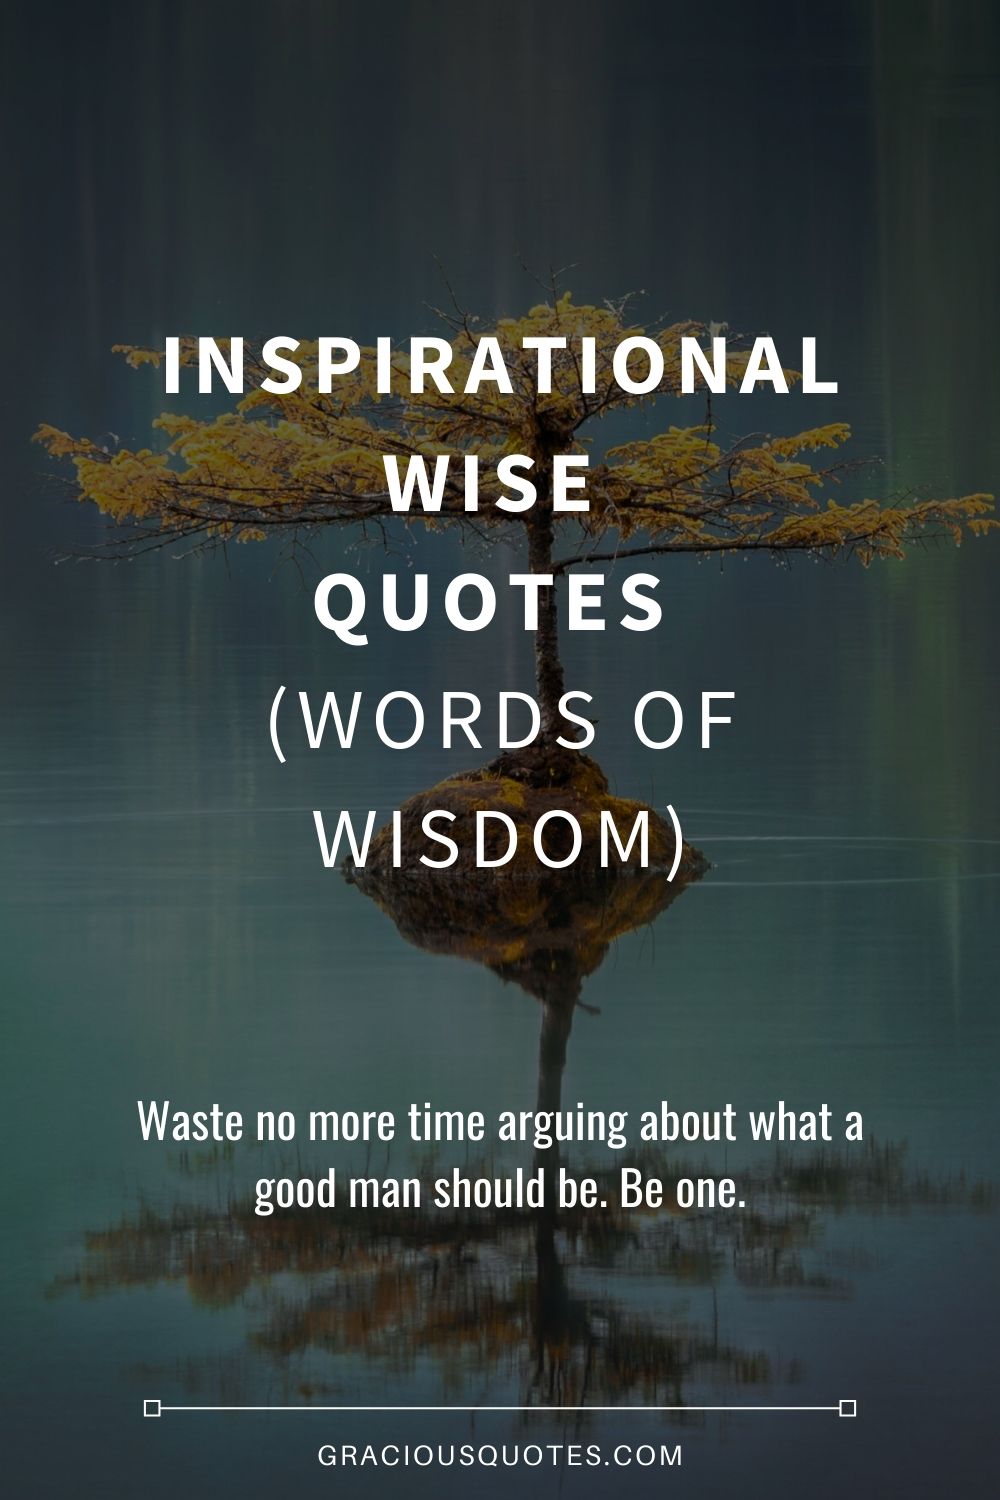 encouraging quotes about life for men